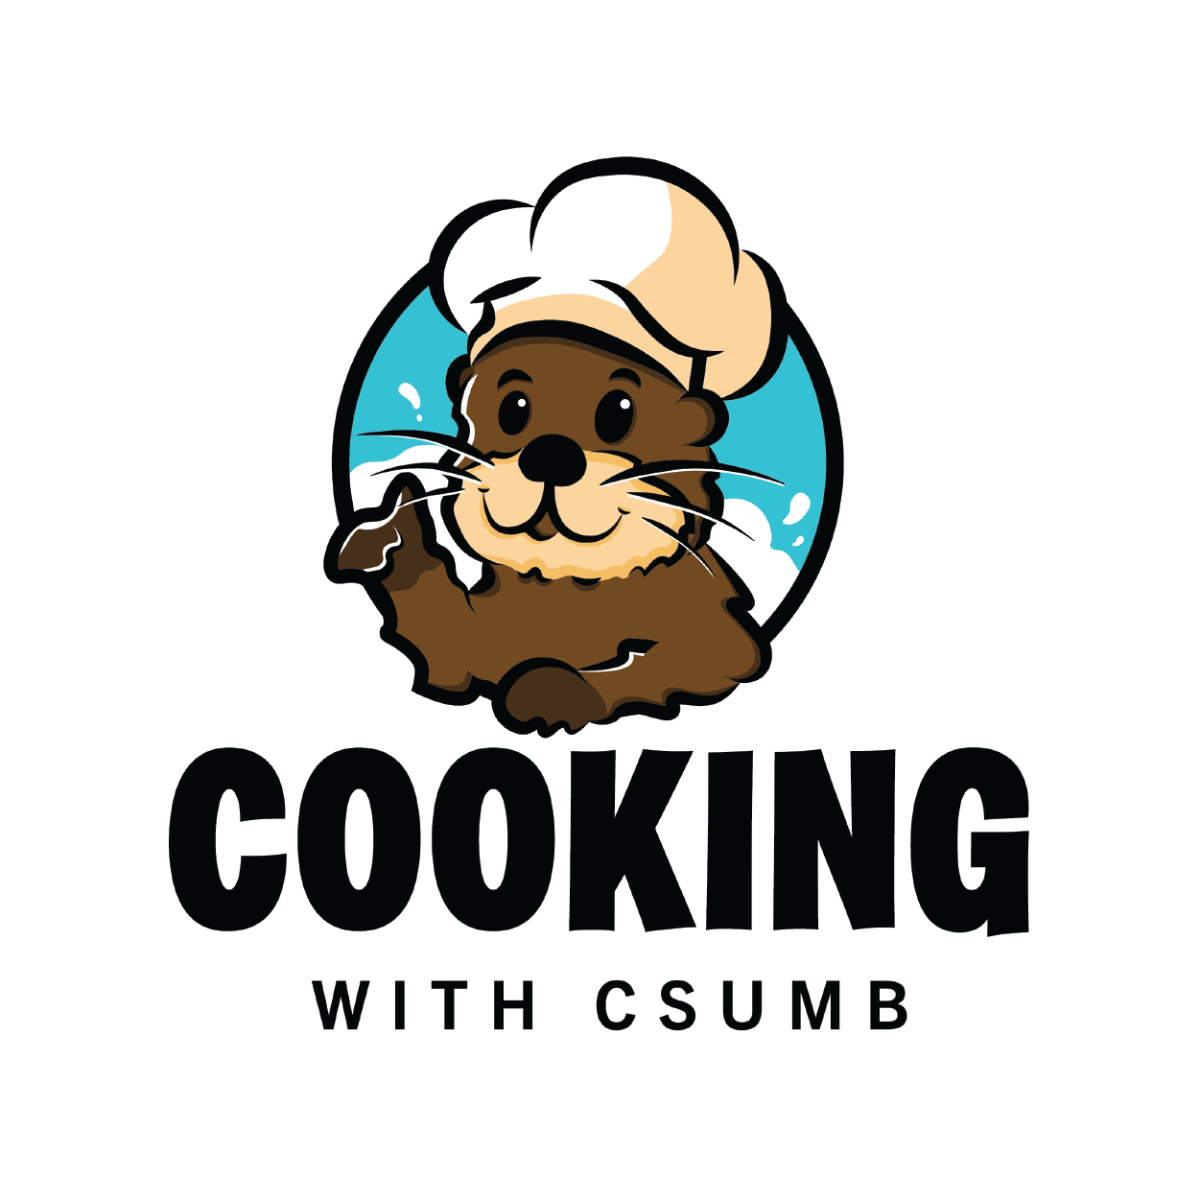 Cooking with CSUMB